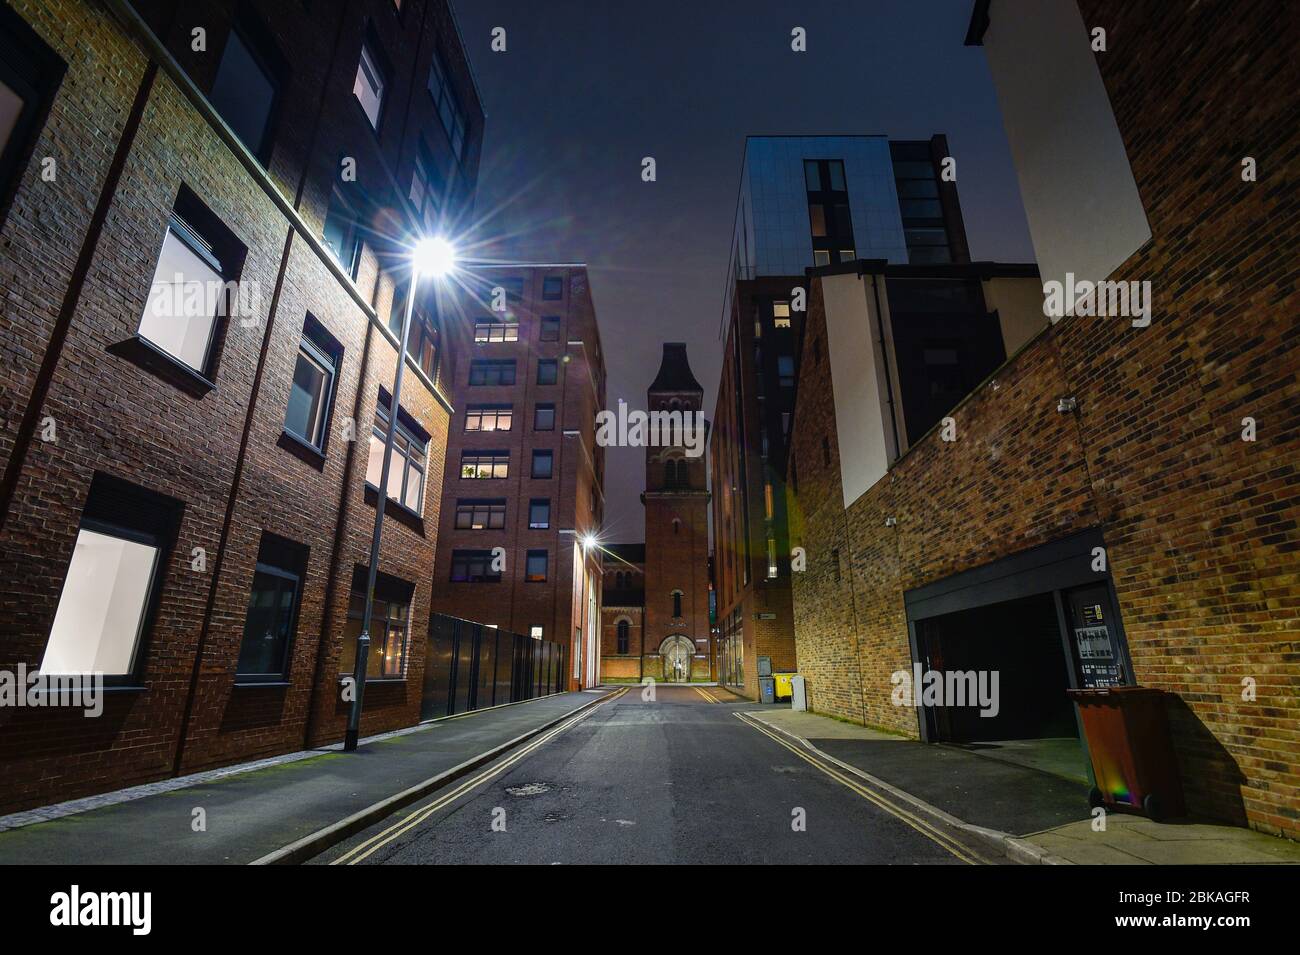 A view of the Halle St. Peters along Sherratt Street from George Leigh Street, Ancoats, Manchester. Stock Photo